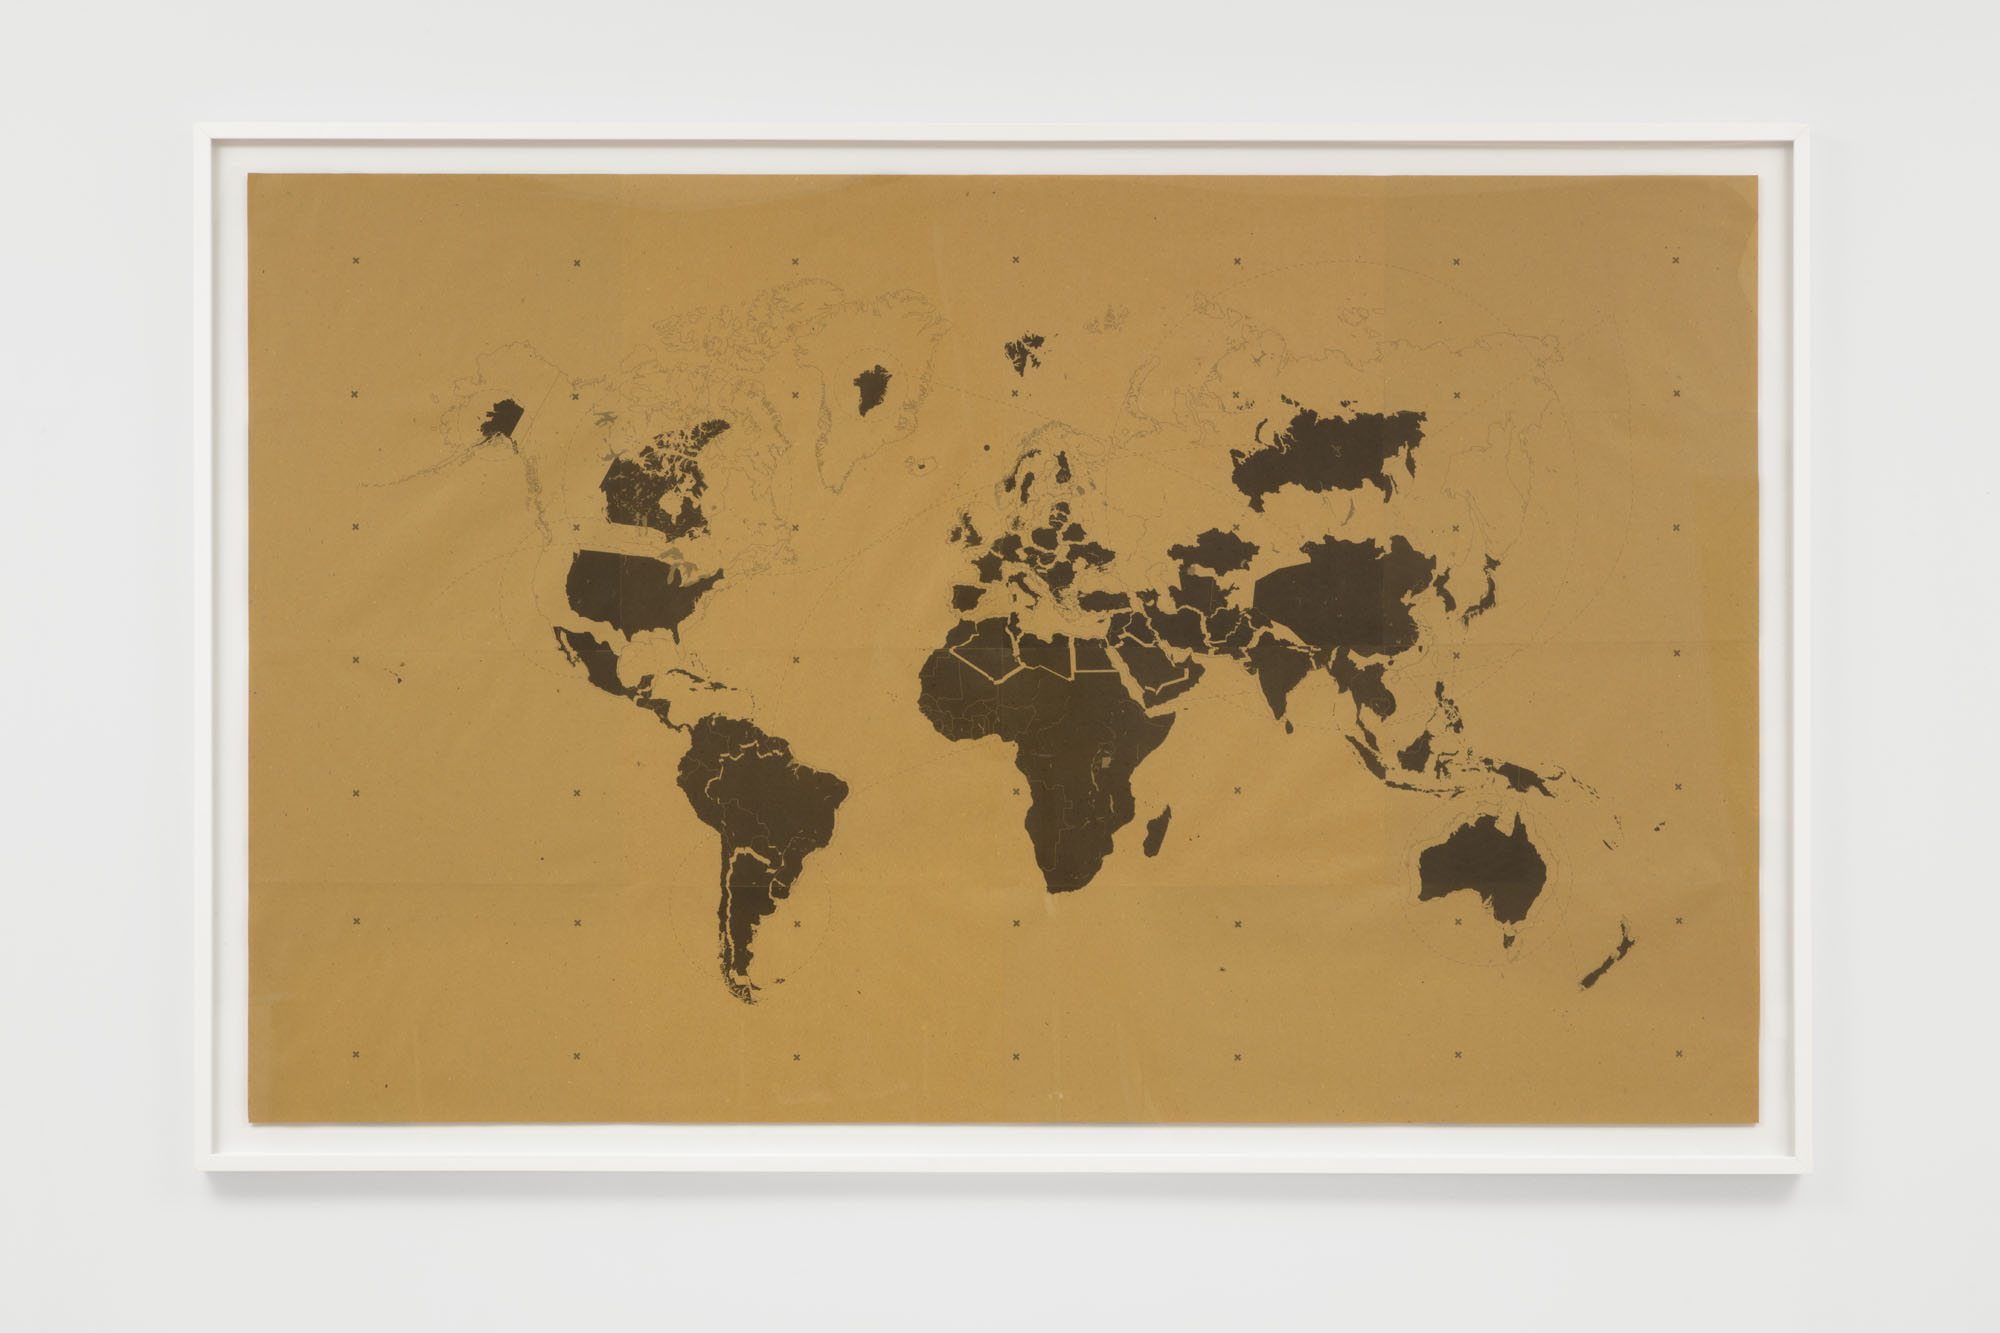 image of an artwork showing a map of the world.